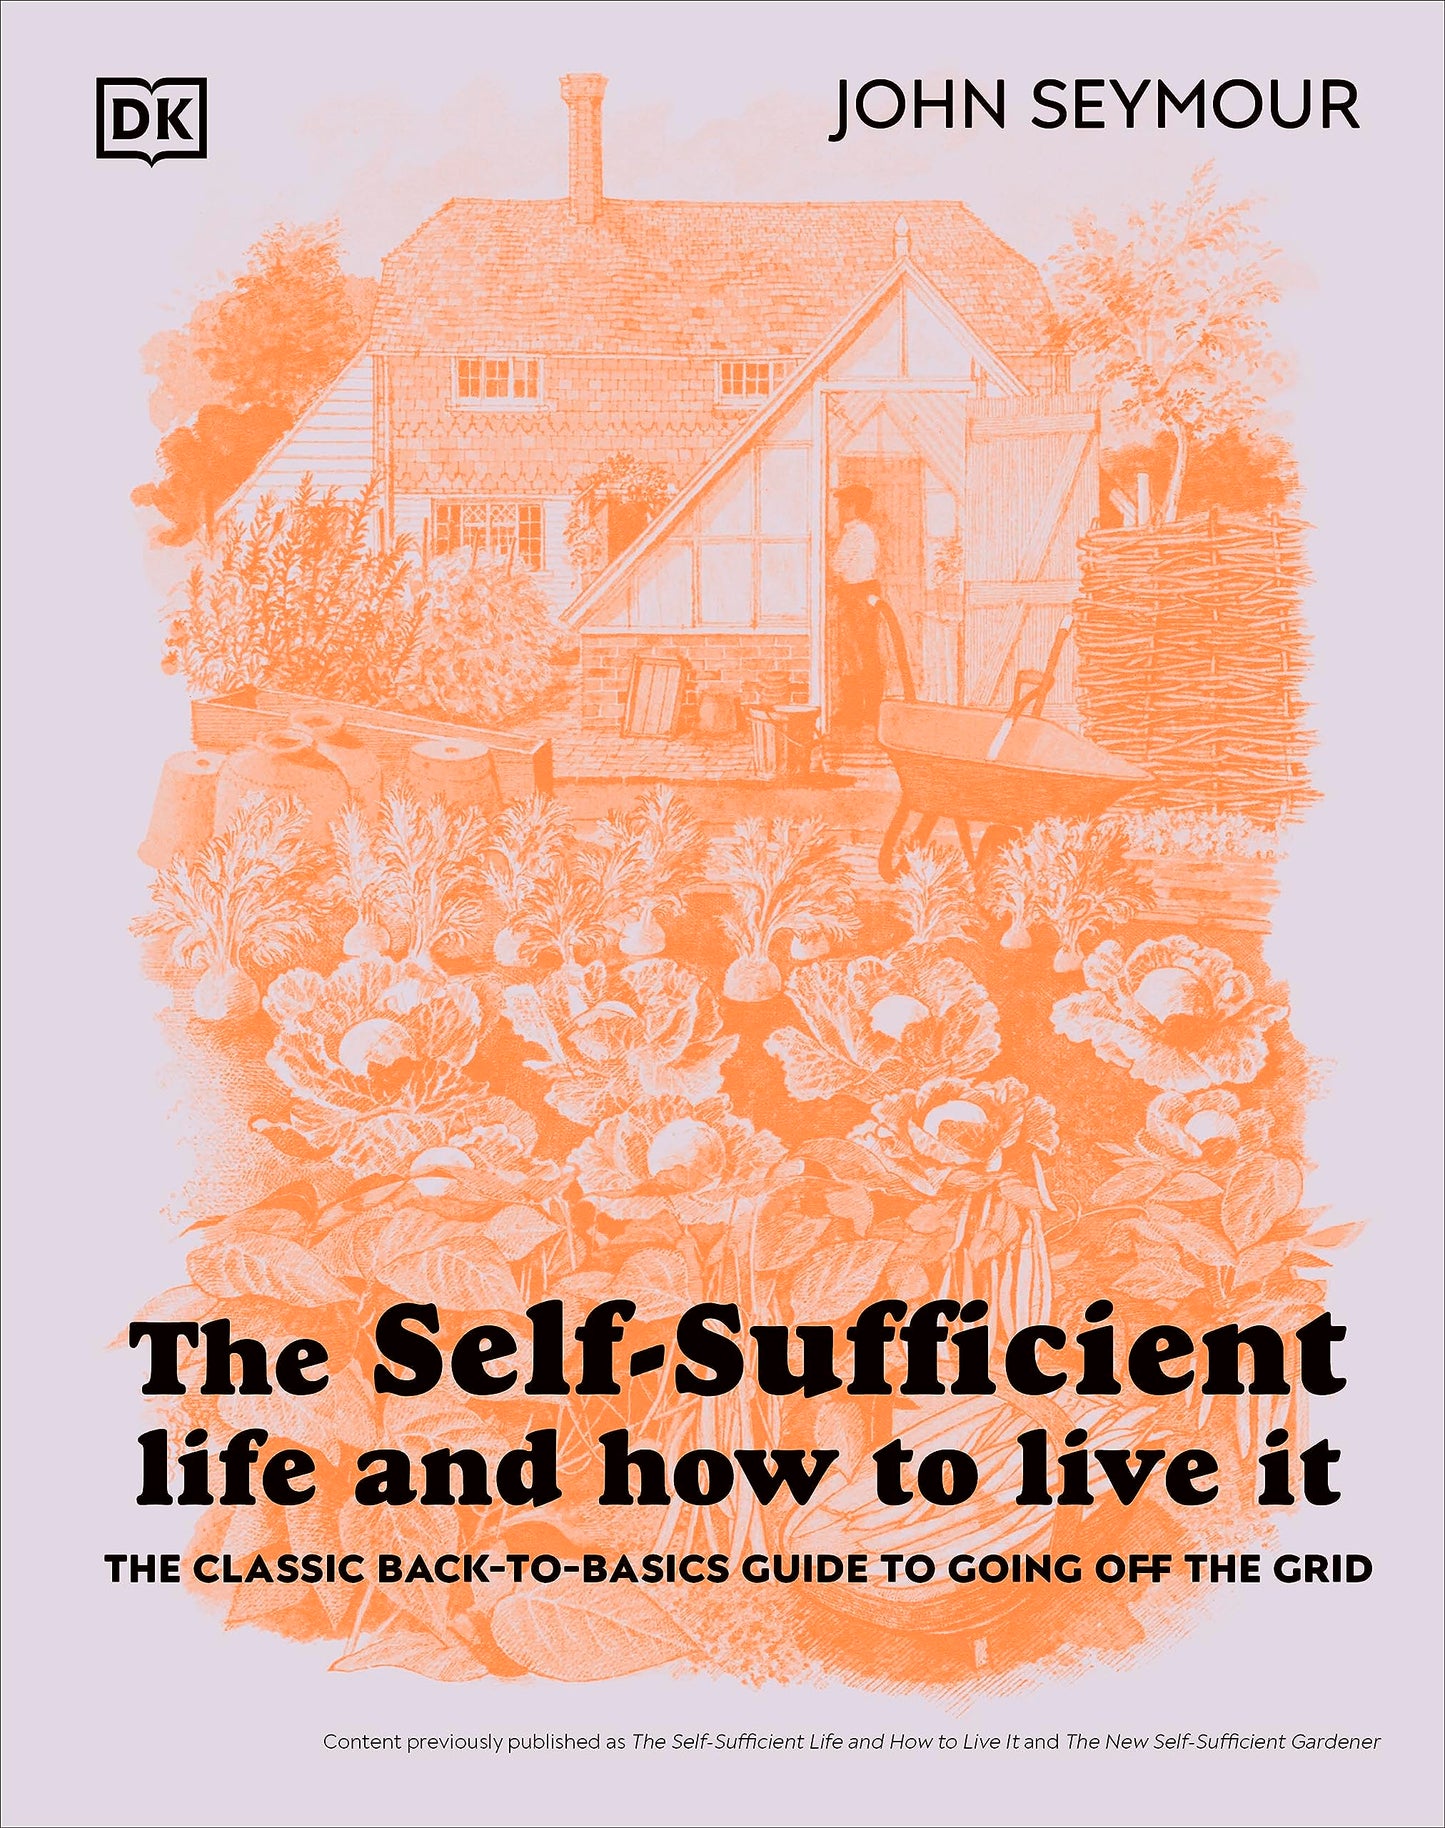 Self-Sufficient Life and How to Live It: The Complete Back-To-Basics Guide